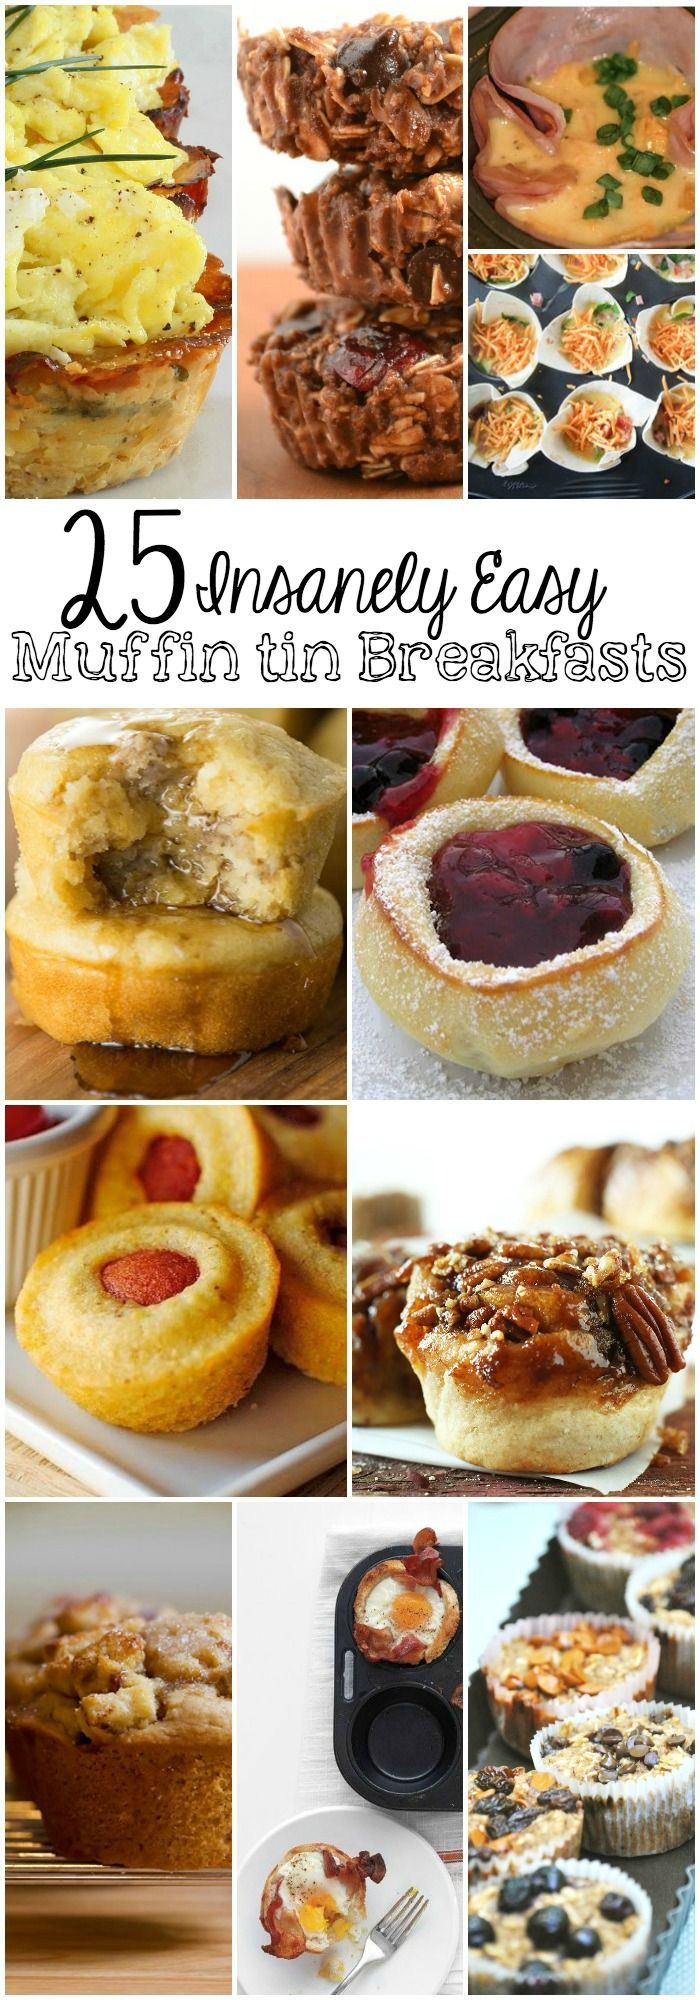 25 Insanely Easy Muffin Tin Breakfast Recipes -   21 breakfast recipes muffins
 ideas